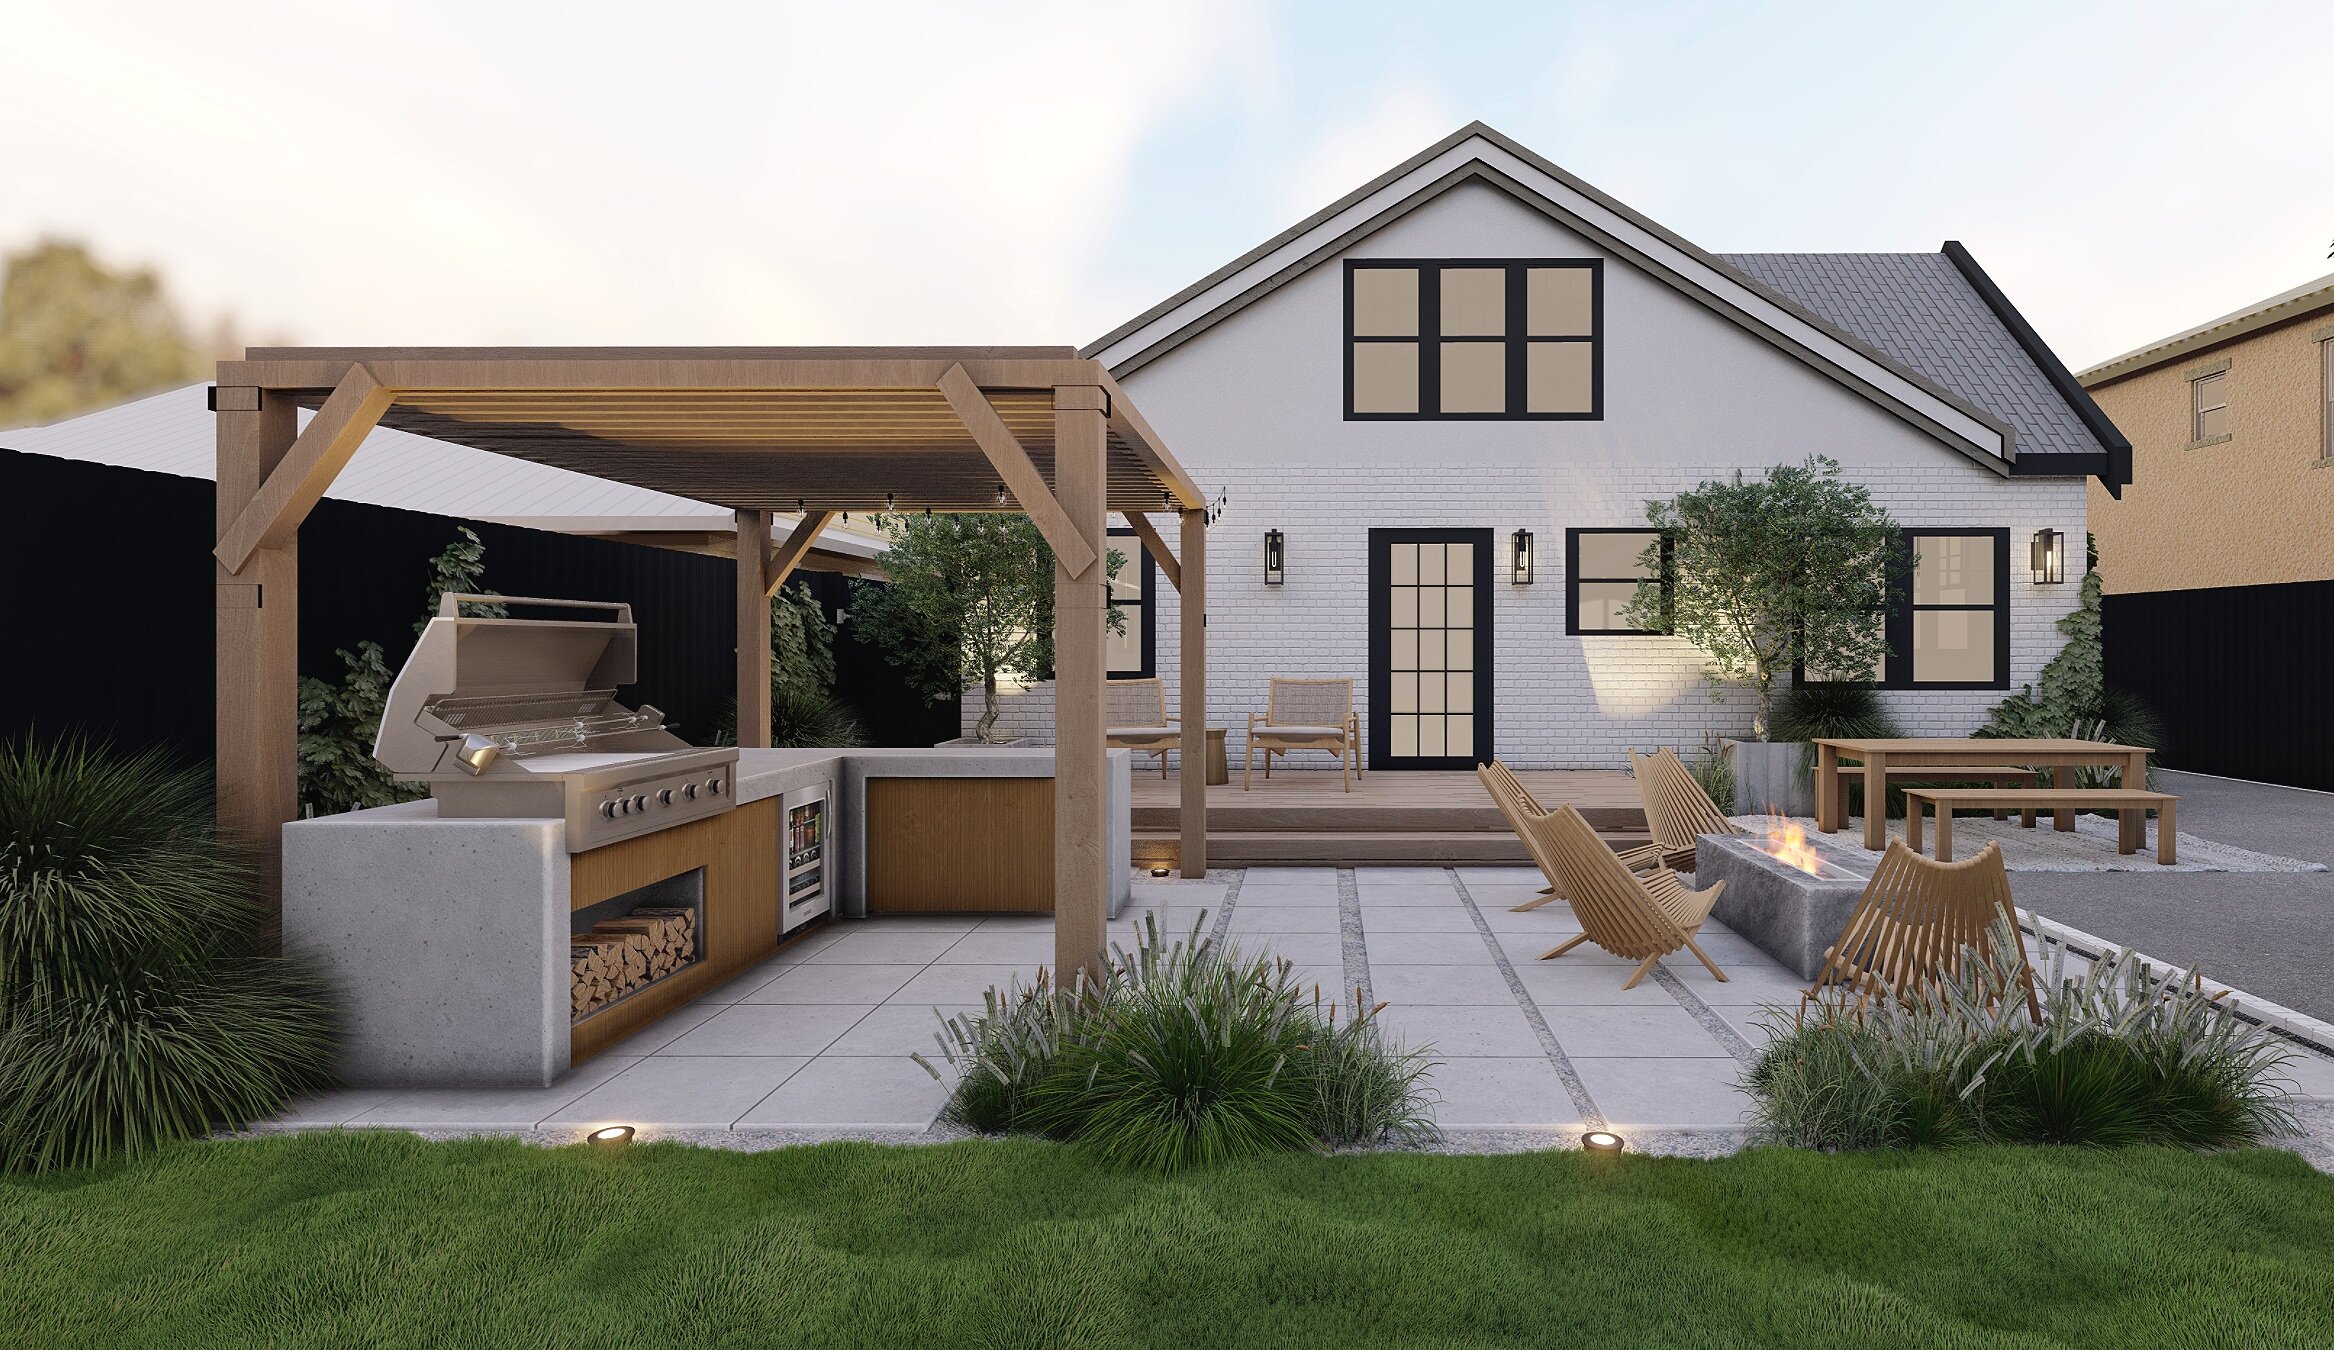 A Yardzen landscape design with a pergola-covered kitchen and outdoor entertaining spaces with fire pit